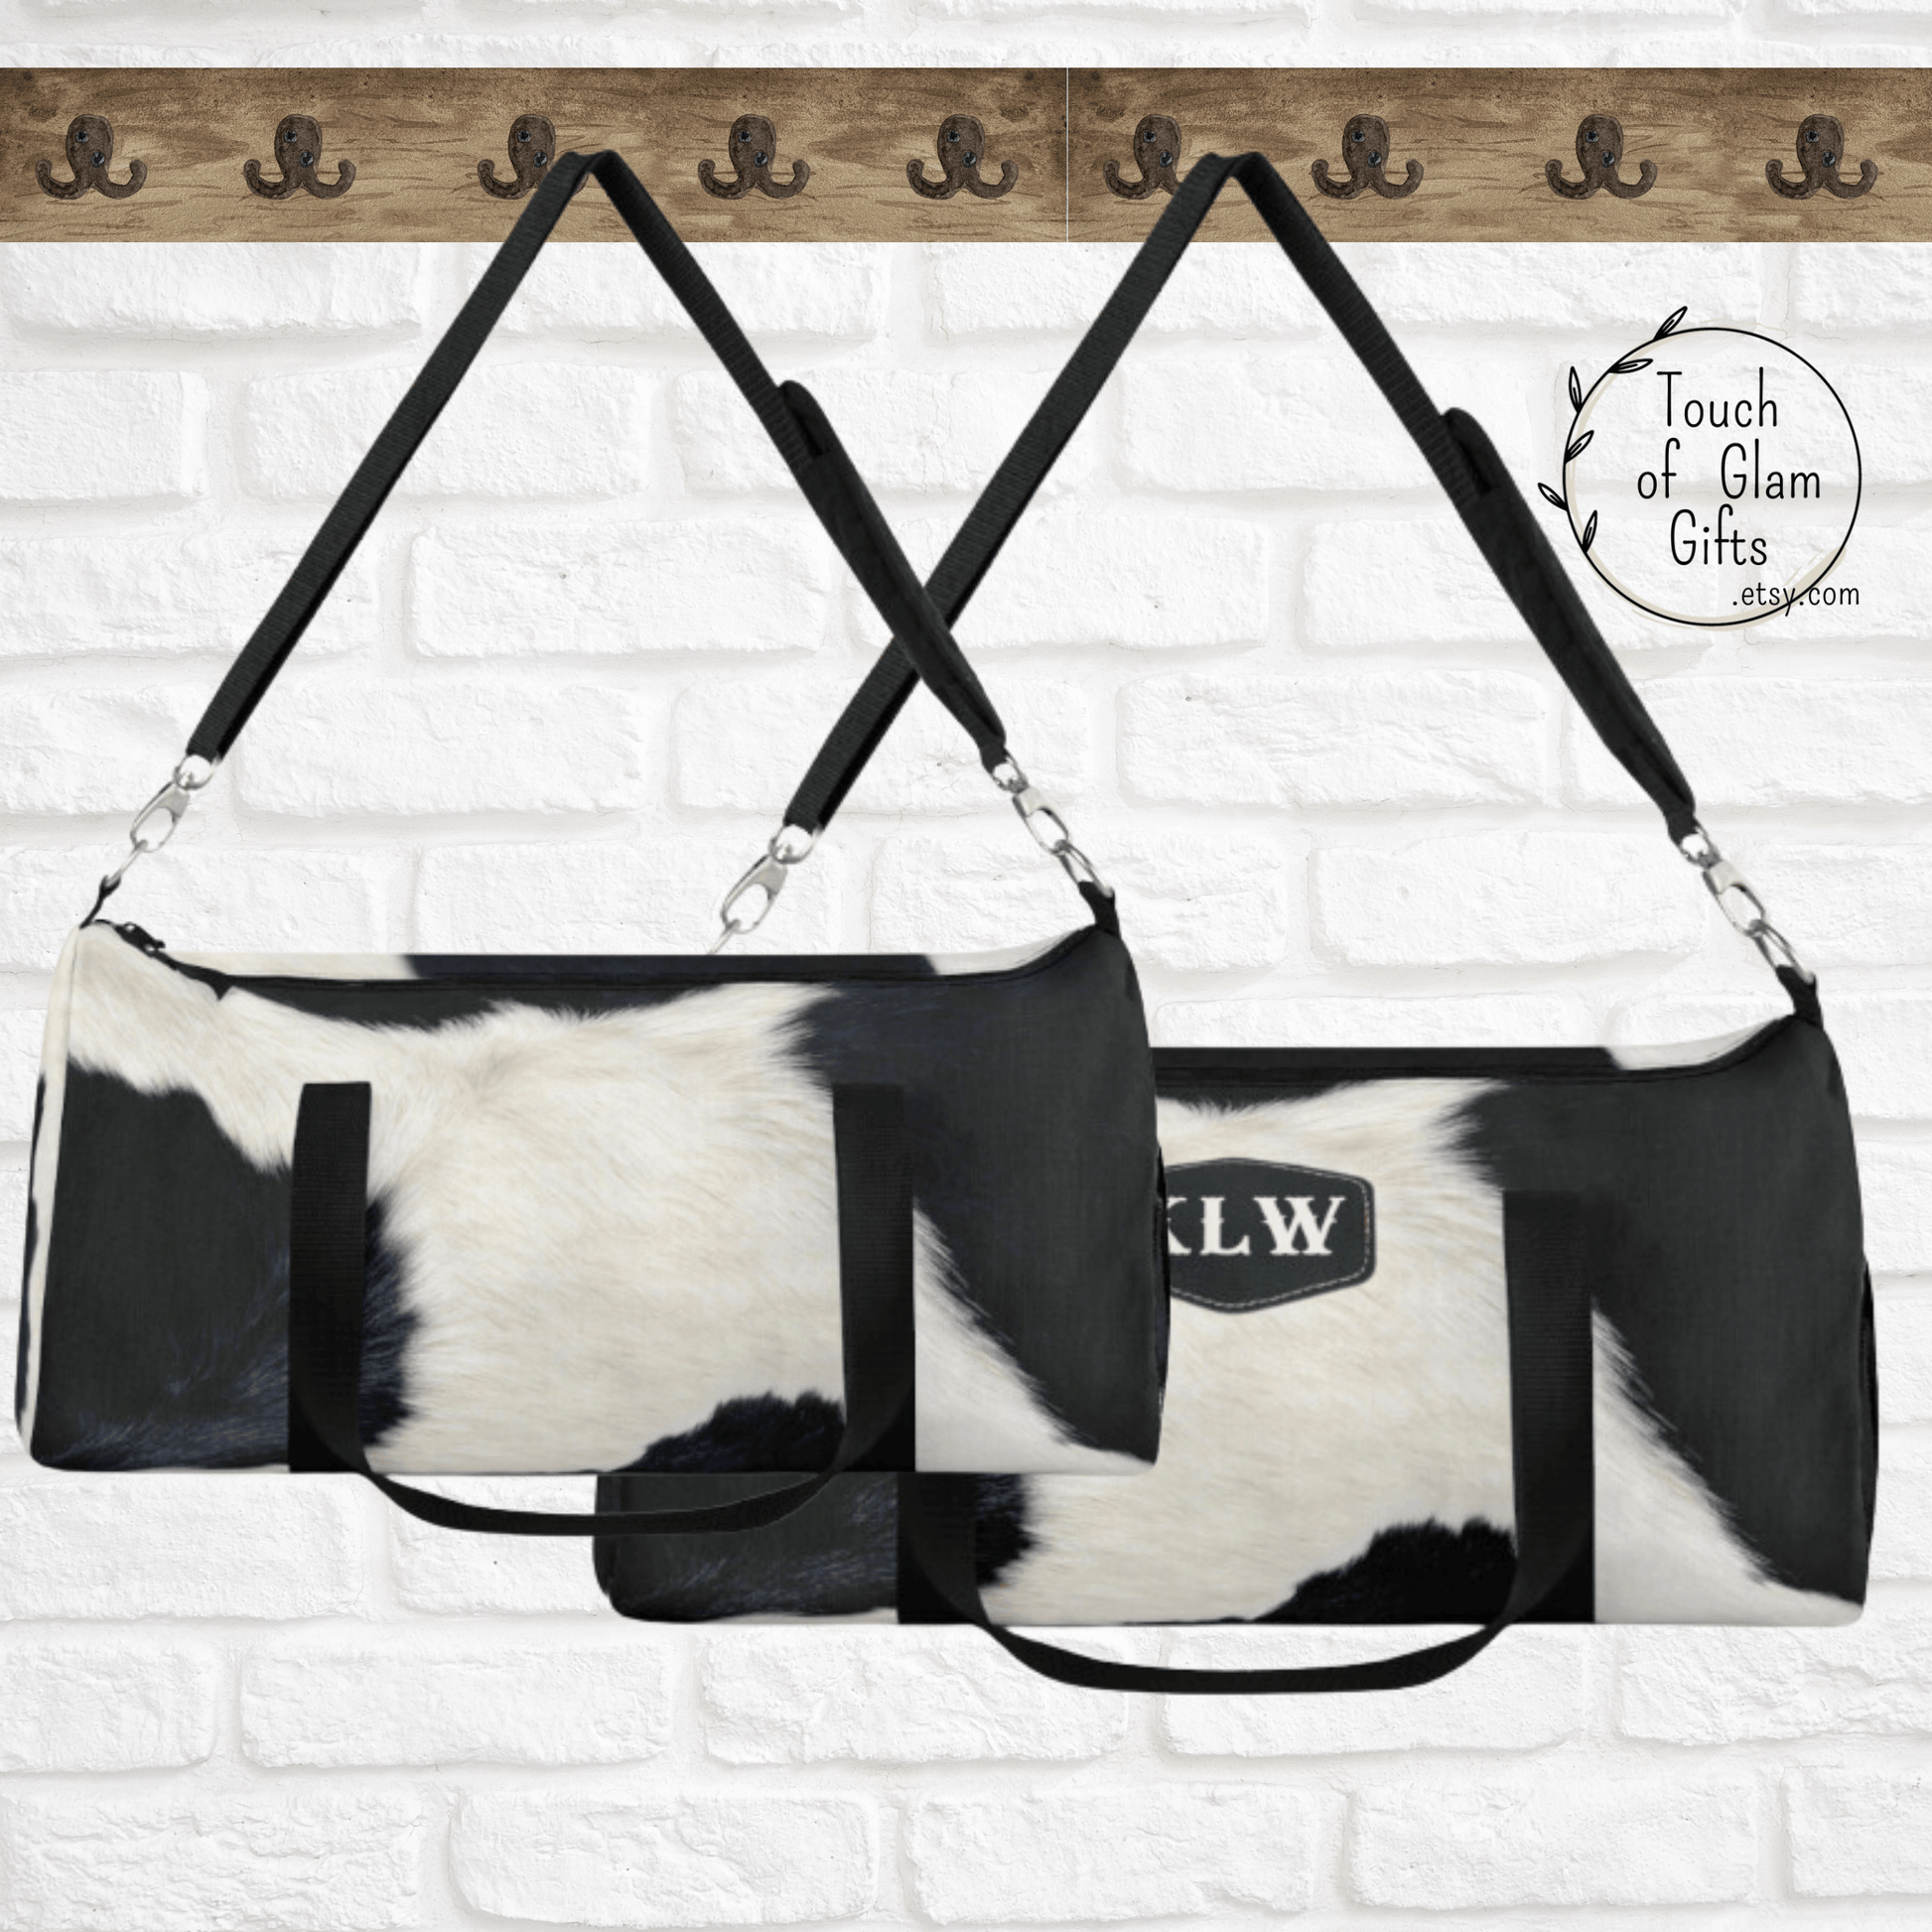 Our cowhide duffel bag is shown hanging with the padded shoulder strap on a hook and the large is monogrammed and the small duffel bag is plain cowhide.